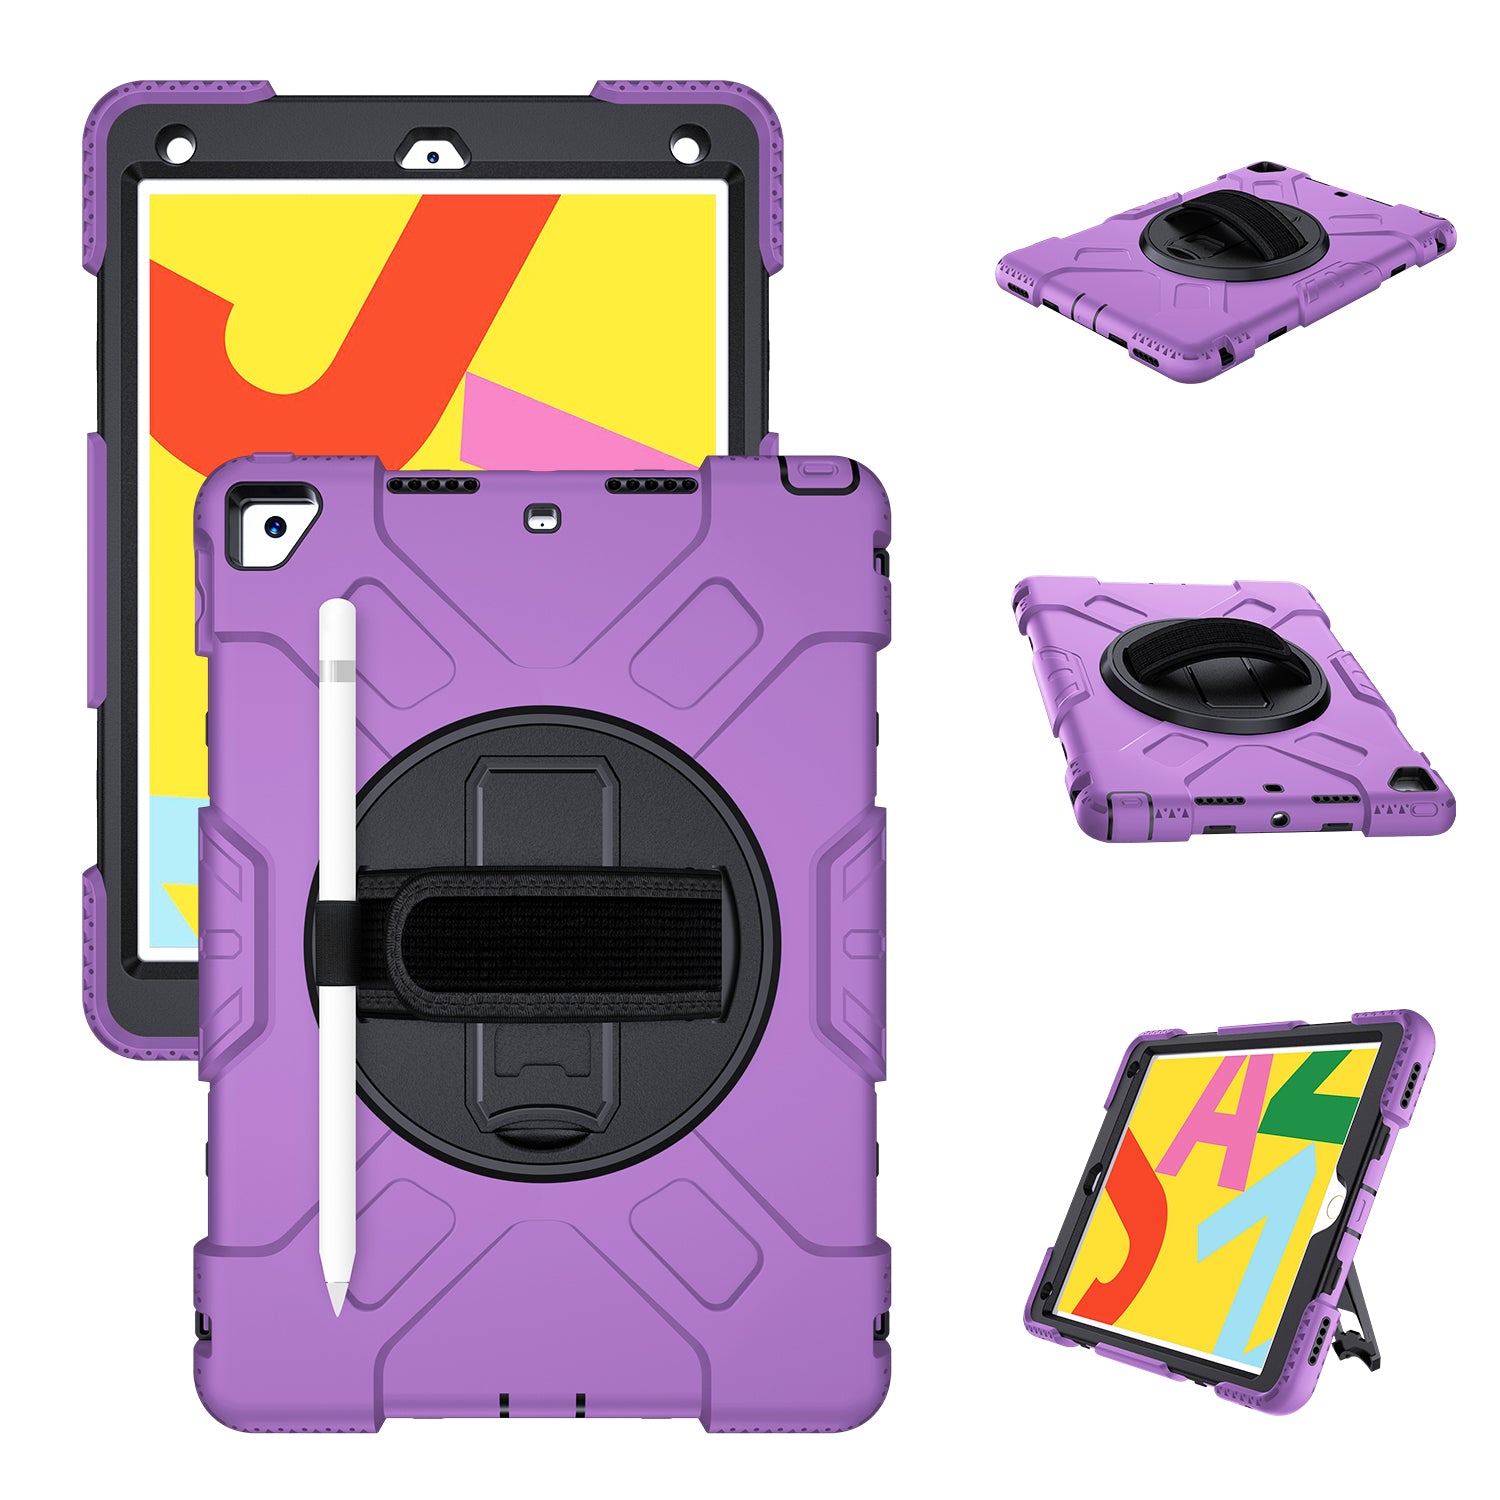 Tough On iPad 7 / 8 / 9th Gen 10.2" Case Rugged Protection Purple